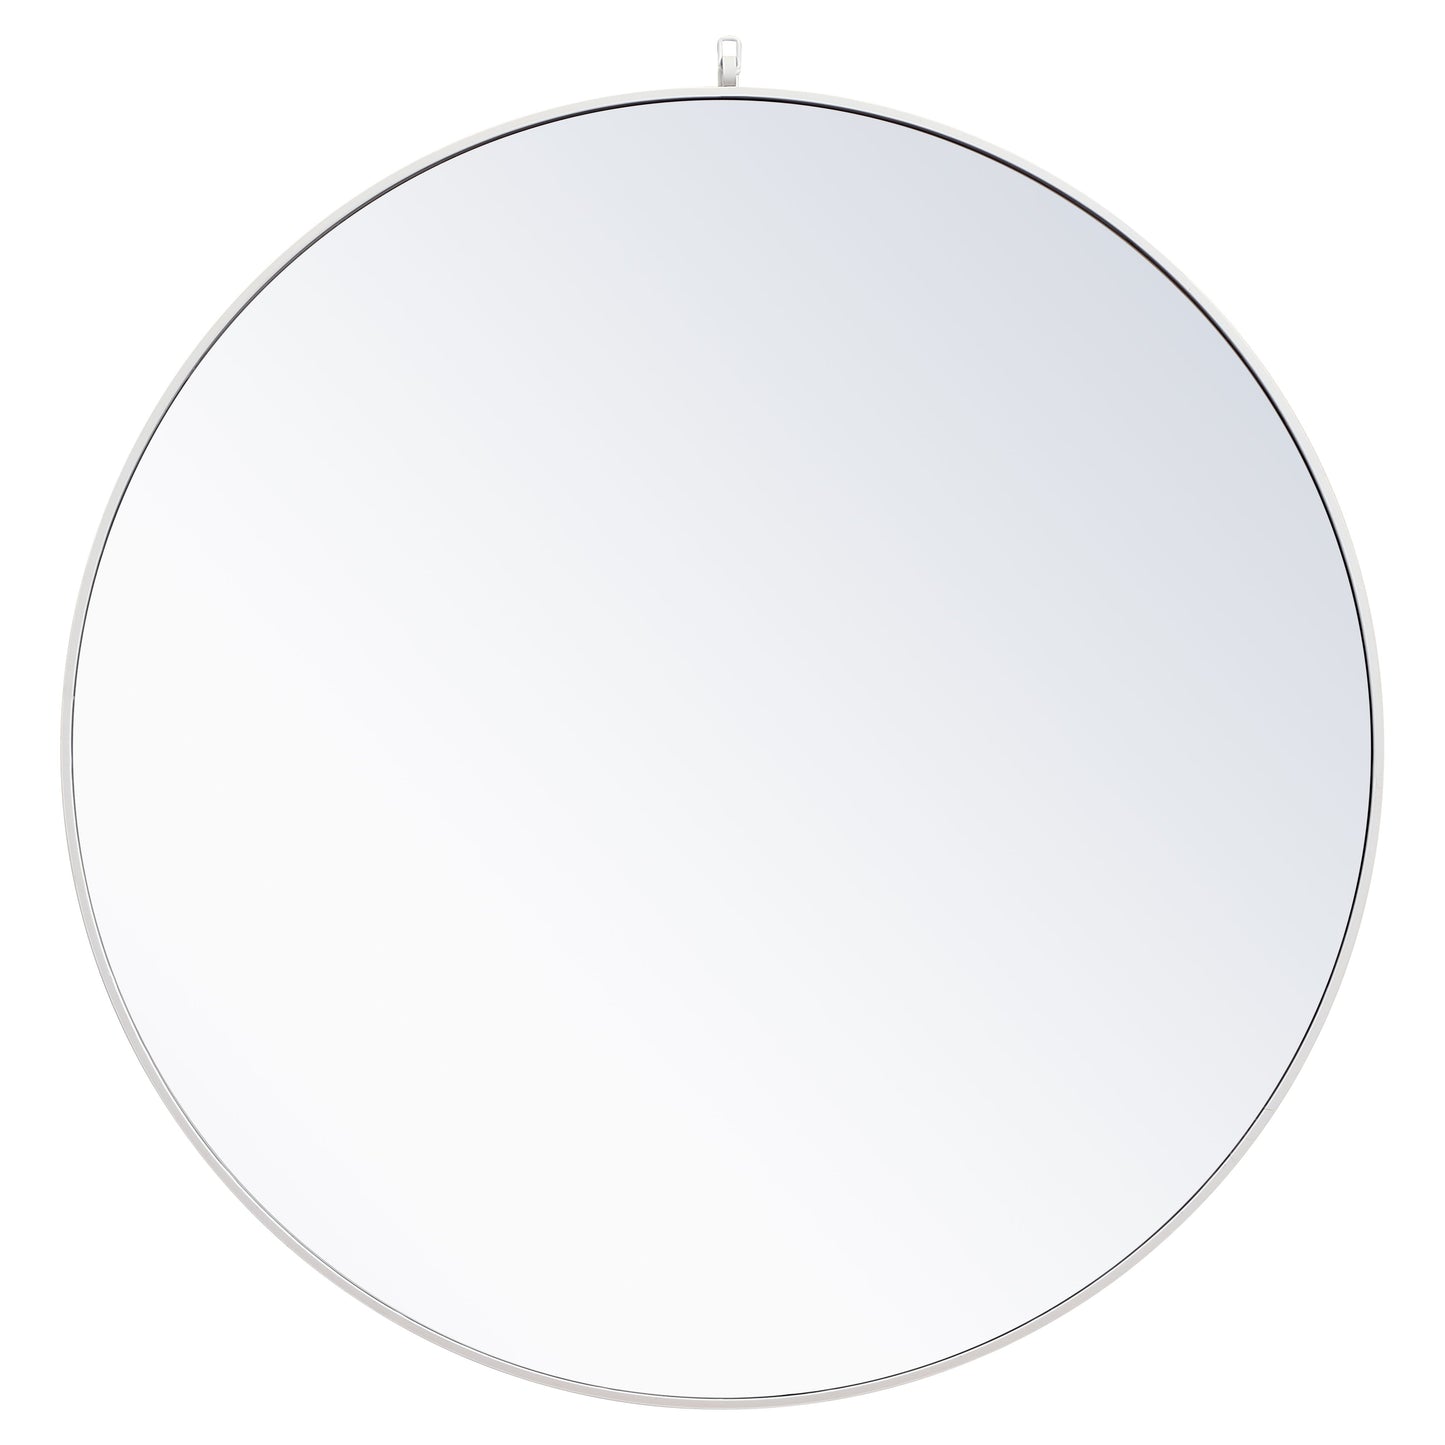 MR4067WH Rowan 48" x 48" Metal Framed Round Mirror with Decorative Hook in White